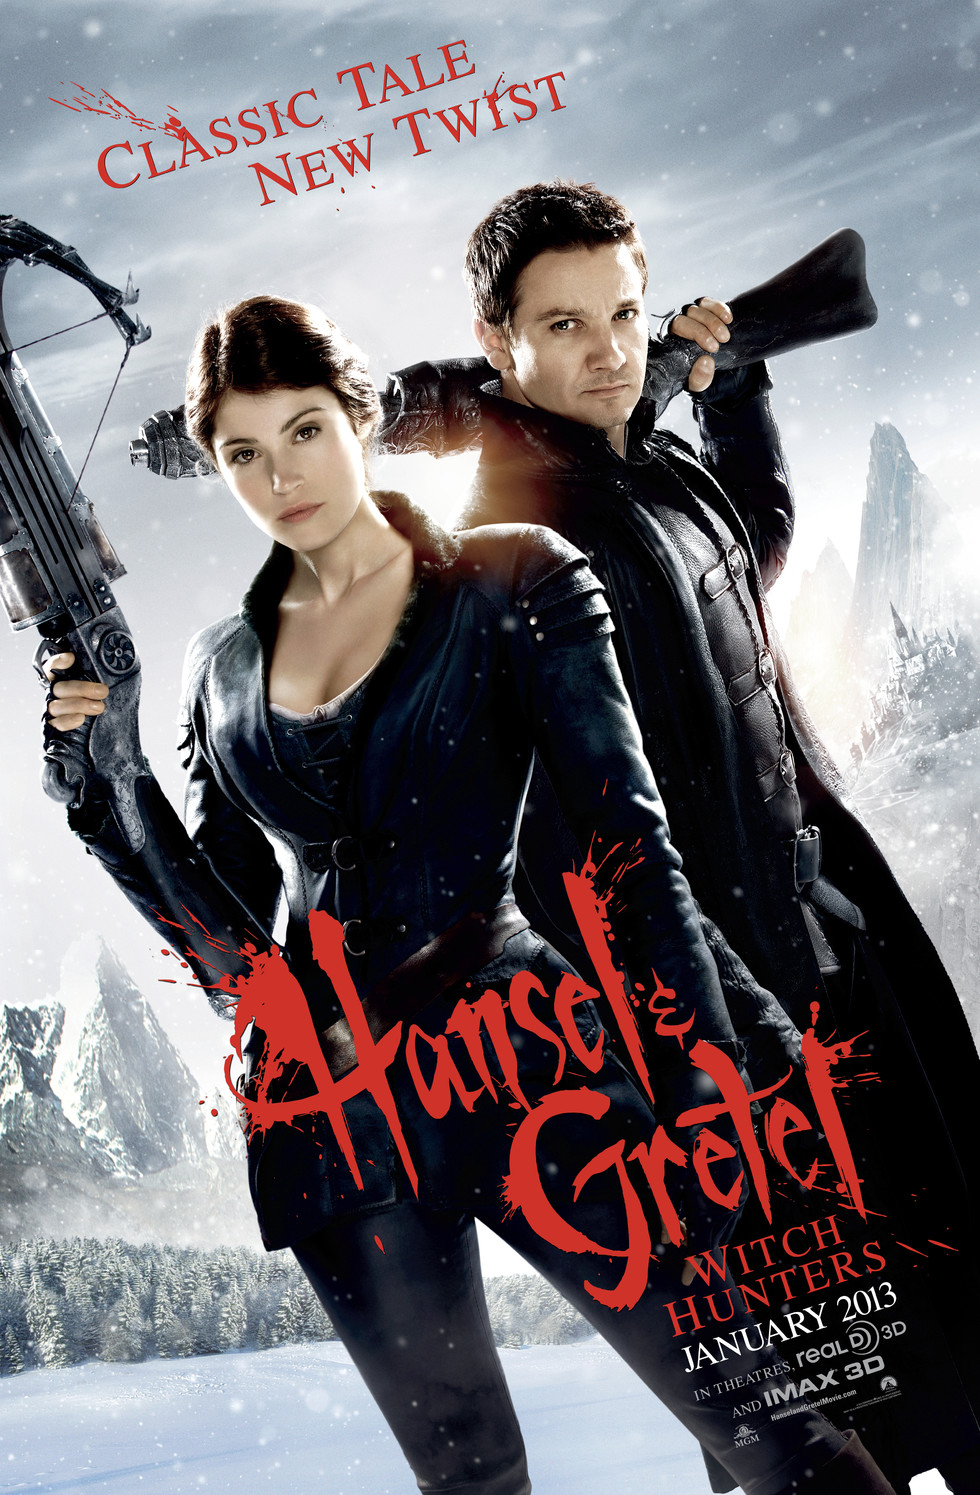 Hansel & Gretel: Witch Hunters - Movie Poster #1 (Large)